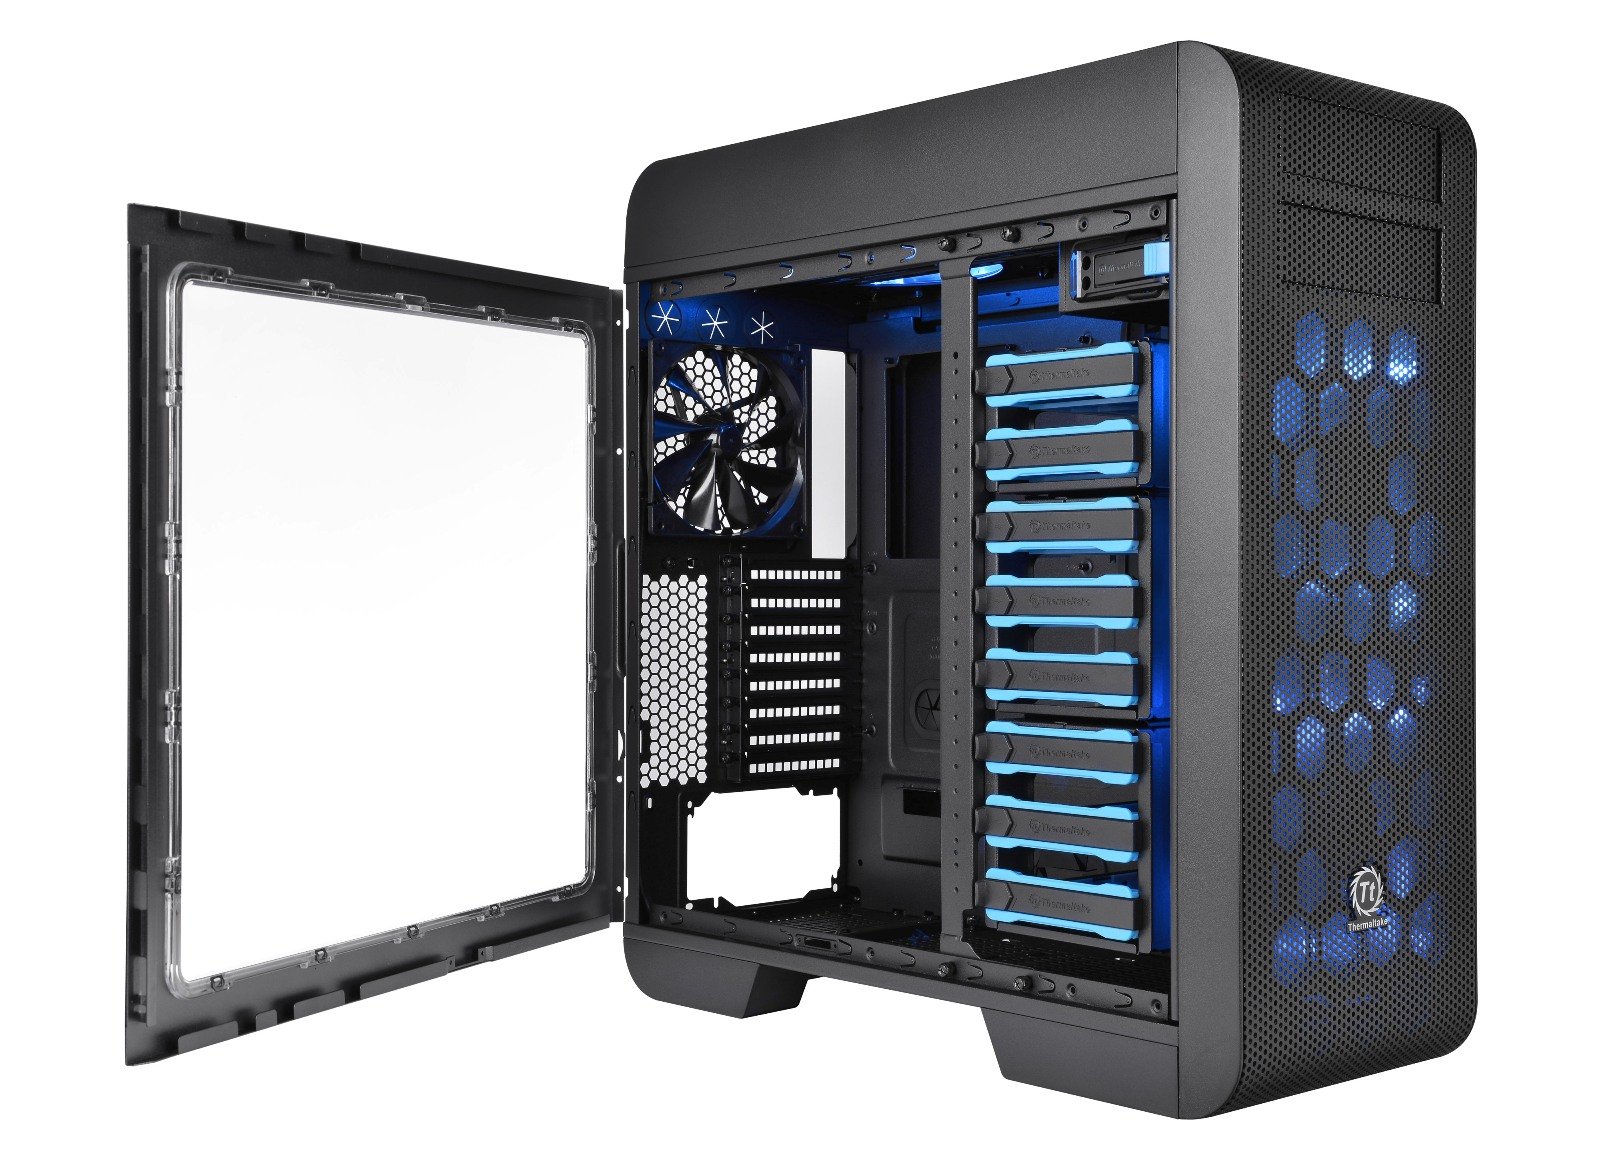 Thermaltake Core V71 full-tower case with the new of its kind concept for more versatility and adaptability to any configuration